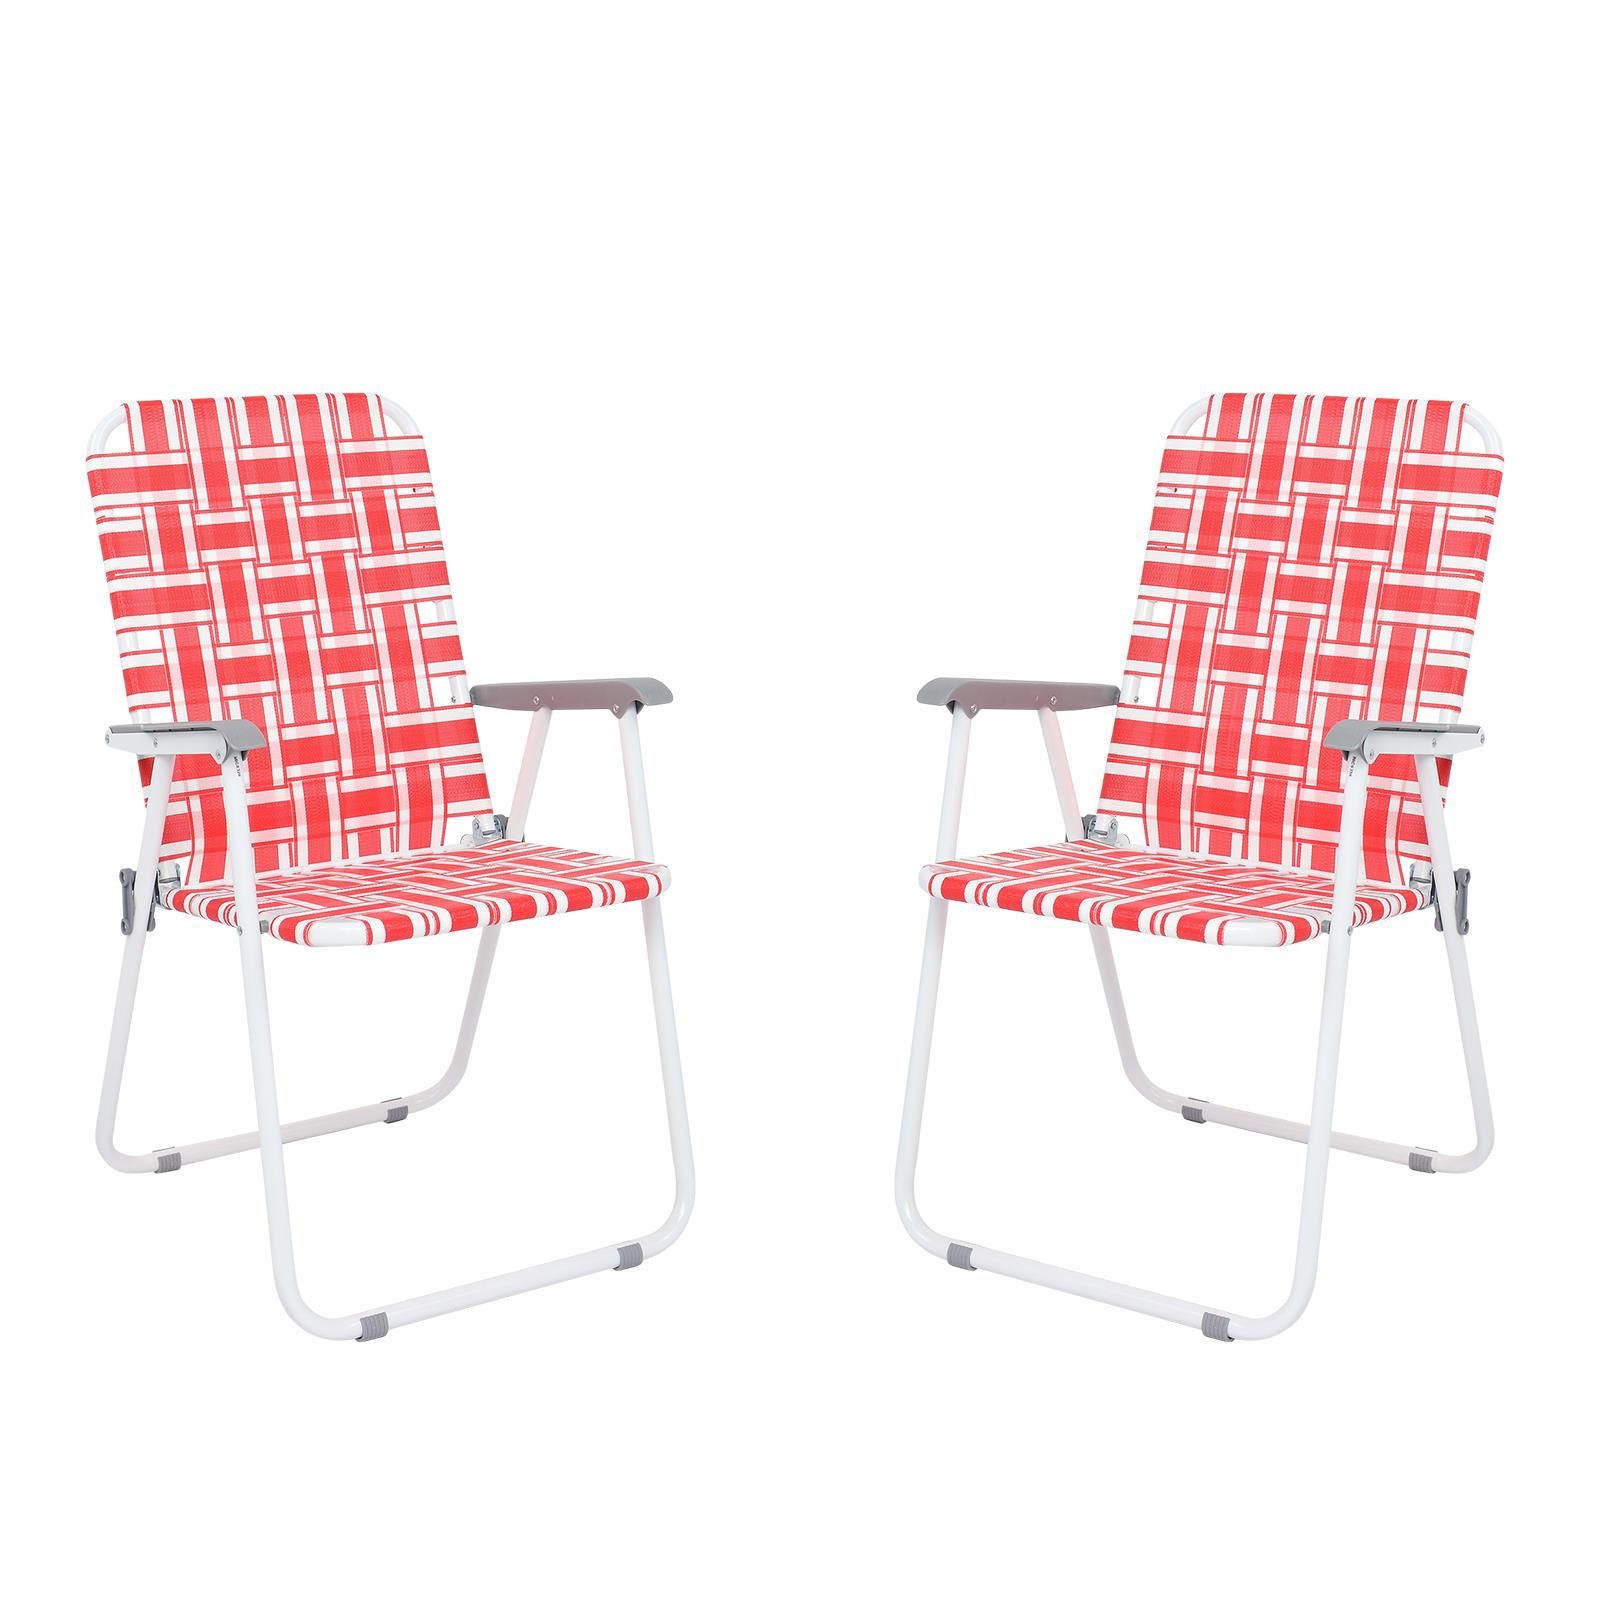 SamyoHome 2 Pack Lawn Chair Set Patio Folding Web Outdoor Portable Camping Chair(Red & White) - image 1 of 6